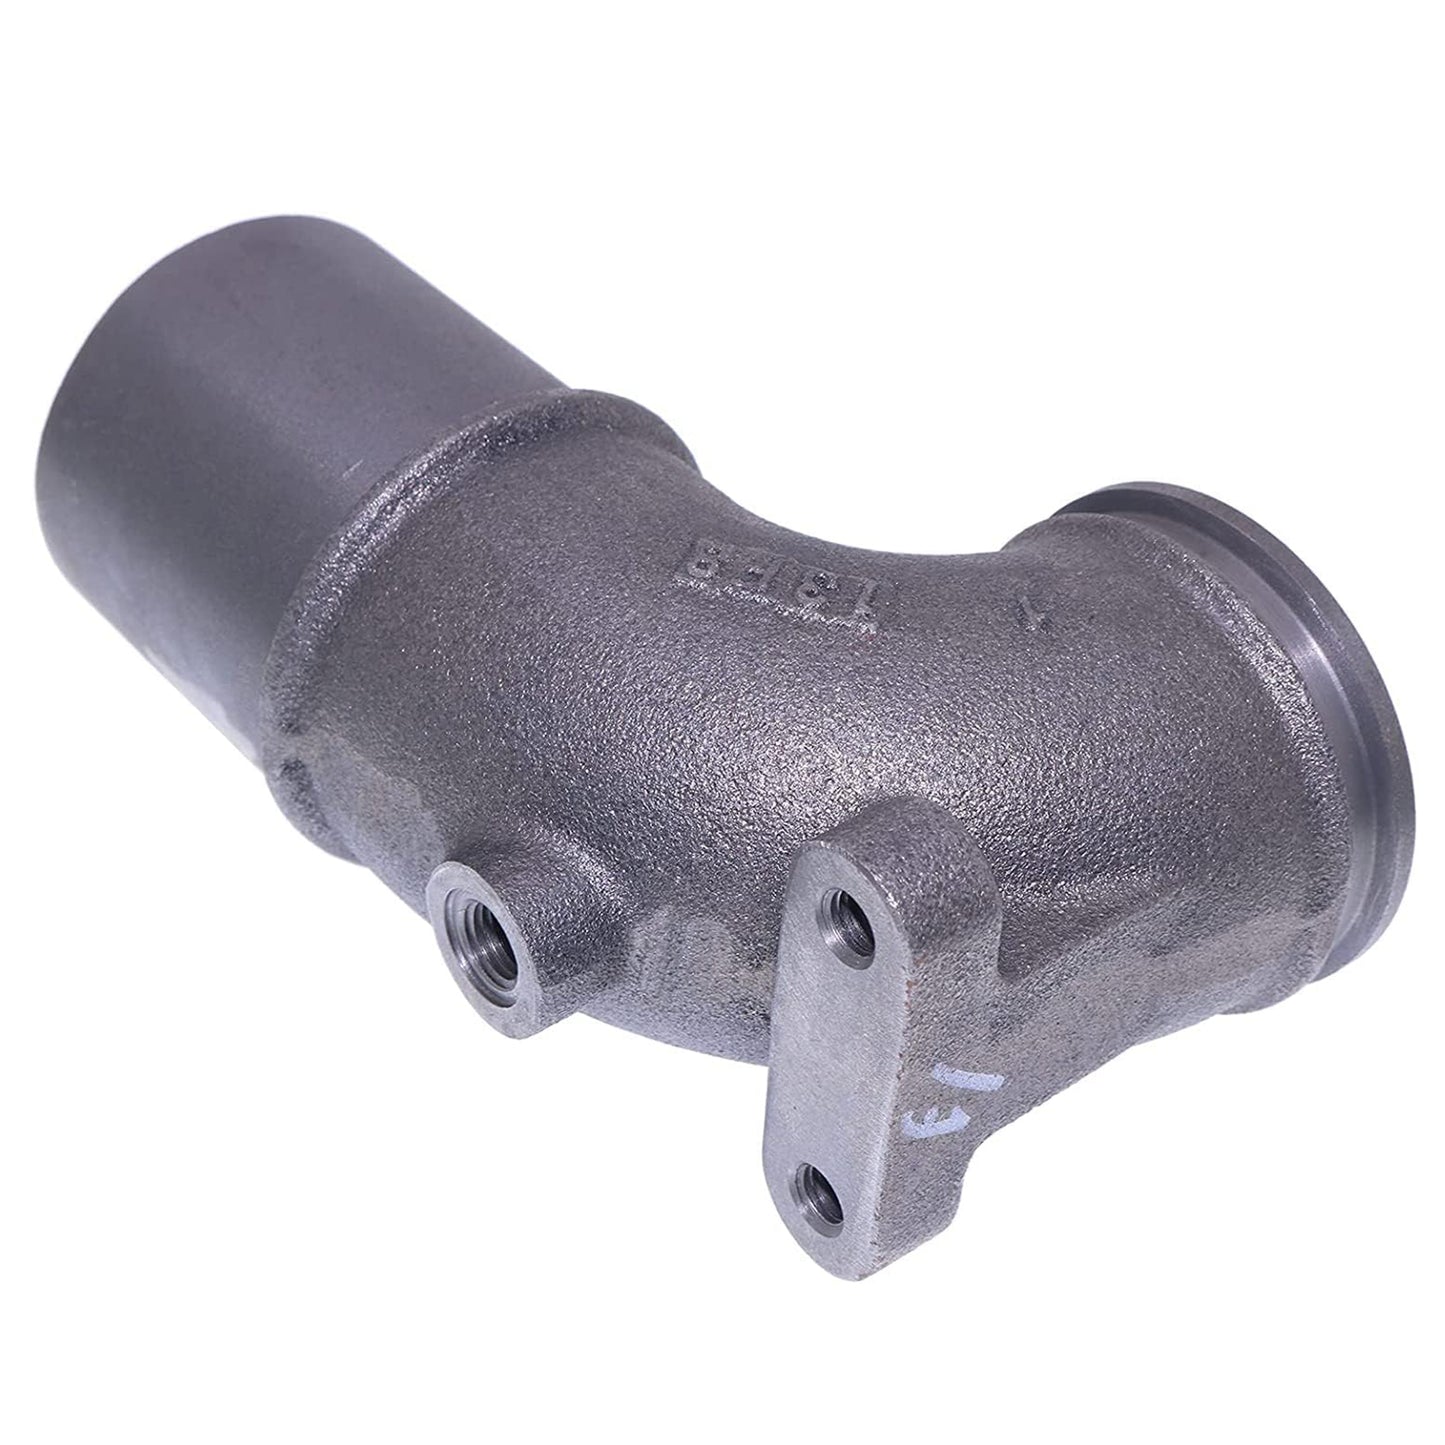 3910992 Outlet Connection Exhaust Compatible with Cummins 4BT 6BT QSB 4B3.9 B4.5 B5.9